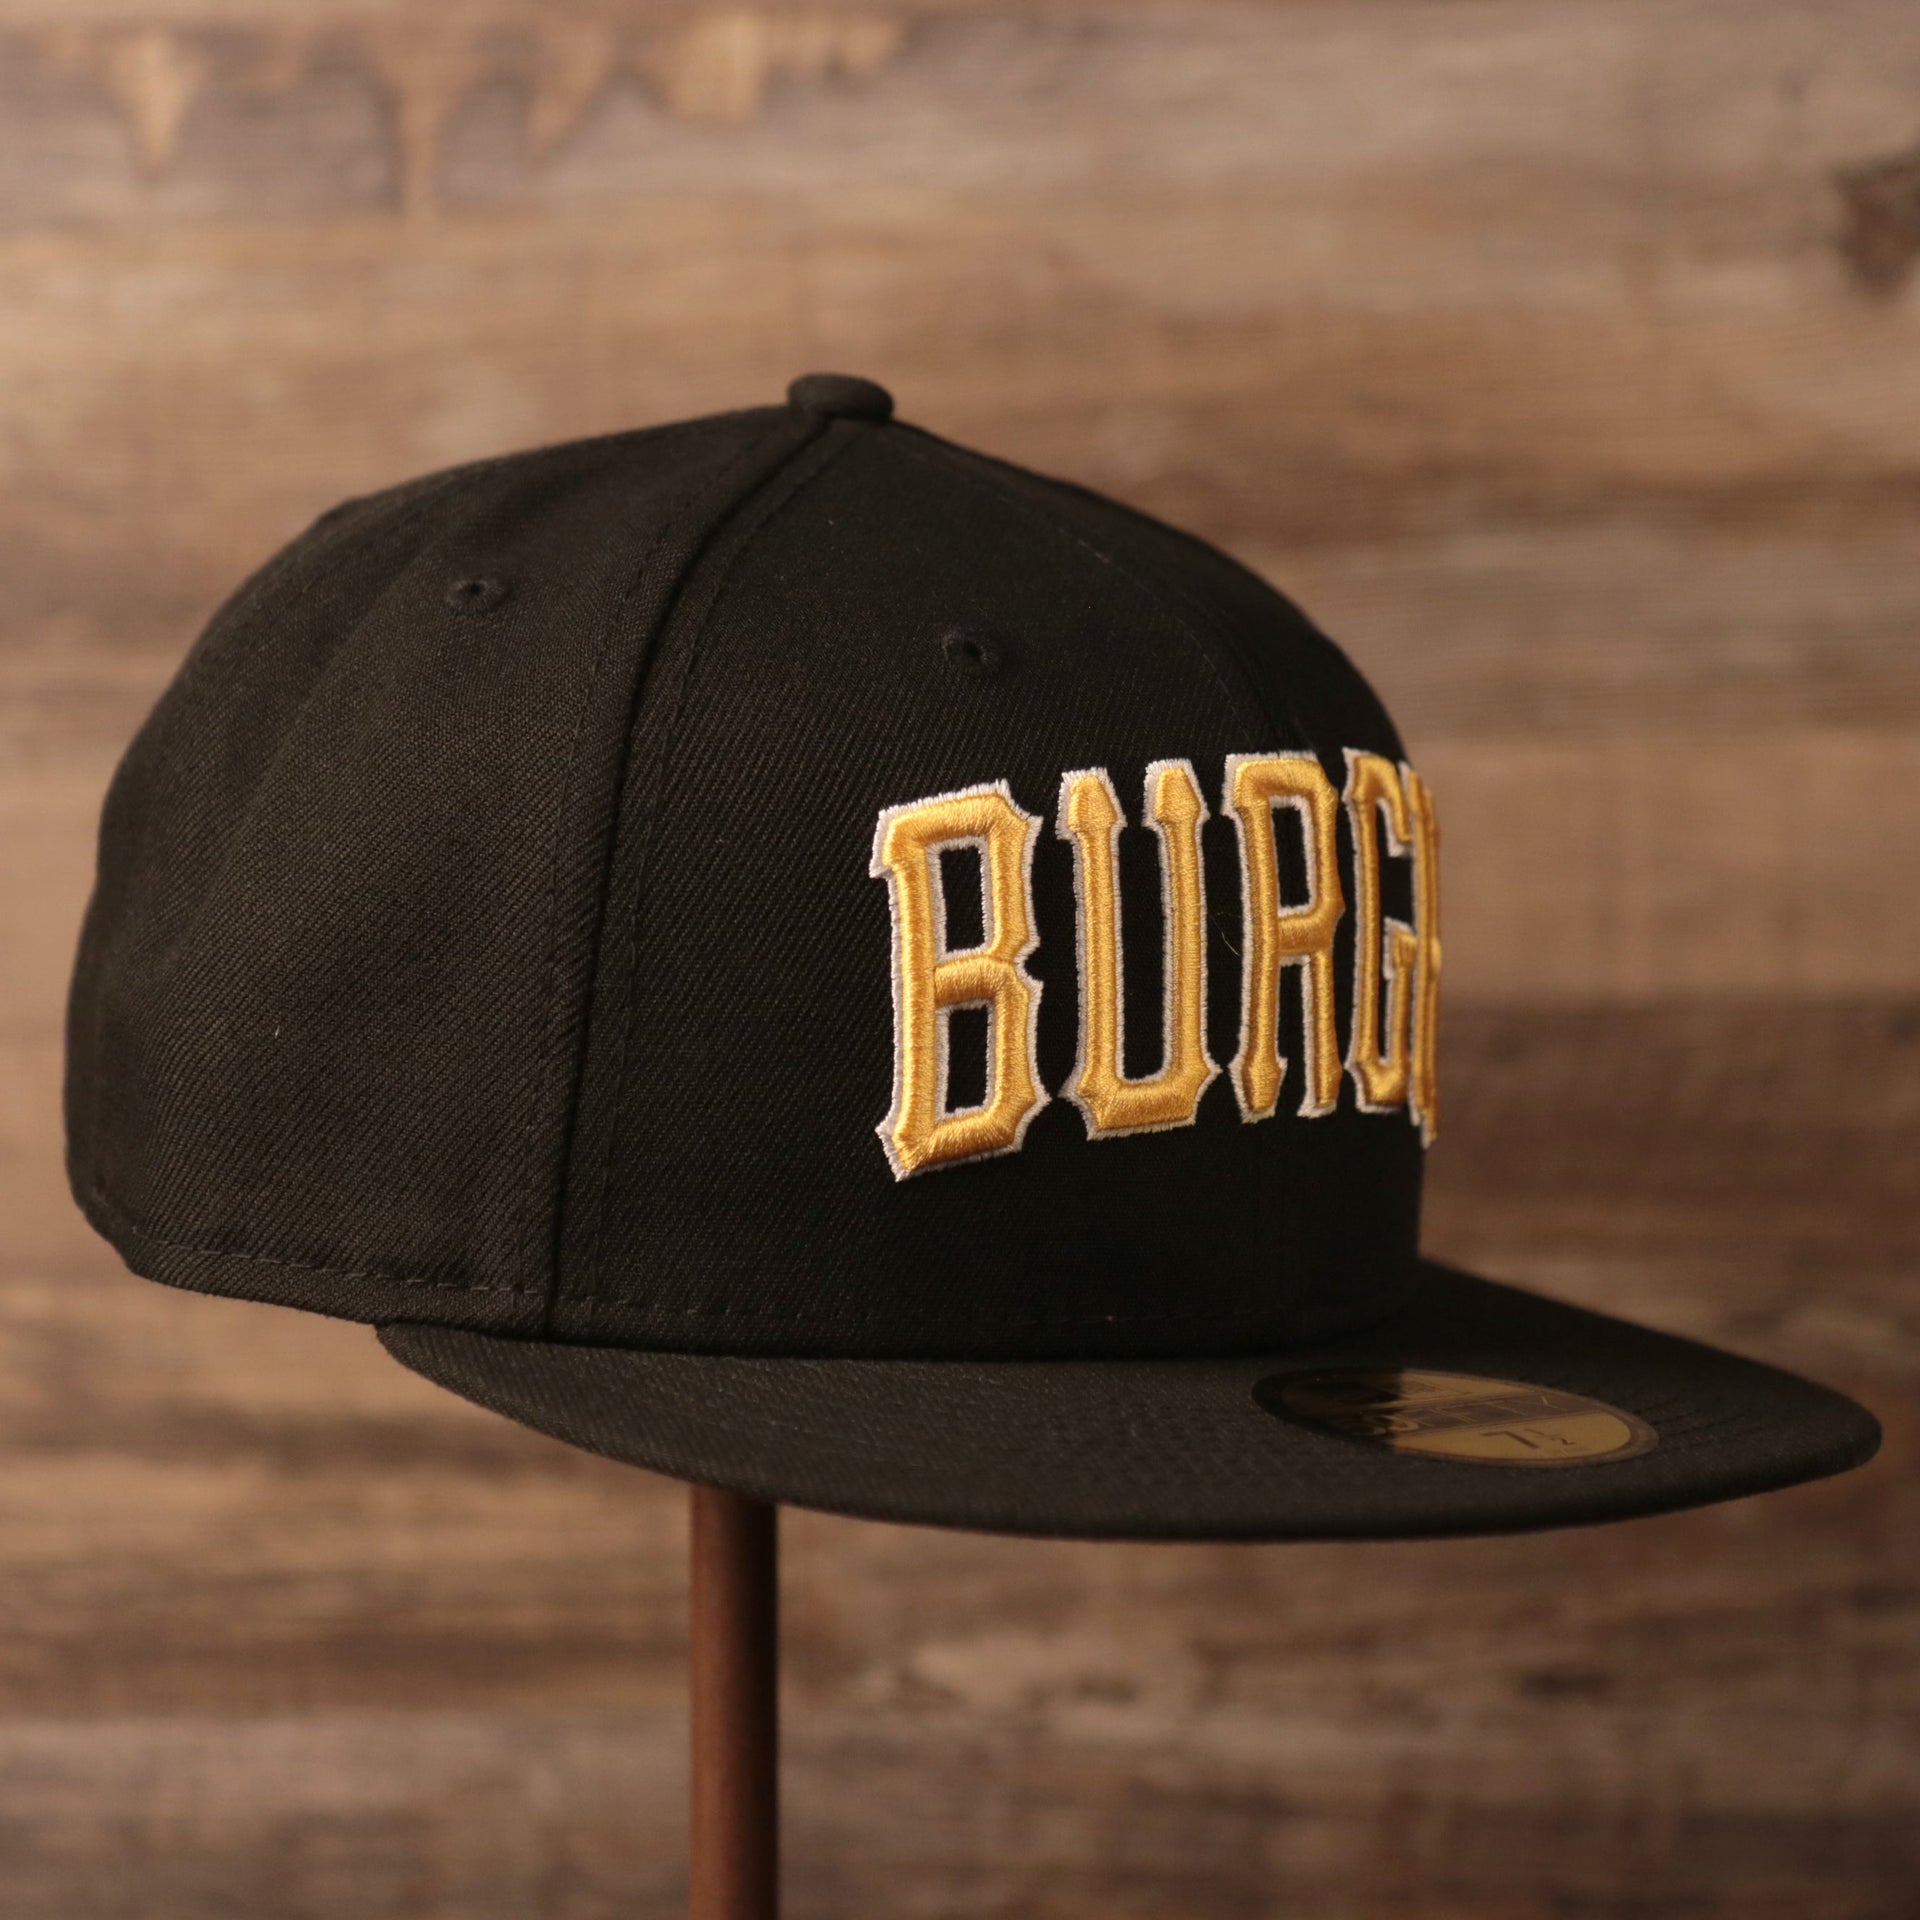 The black New Era fitted cap for the Pittsburgh Pirates.